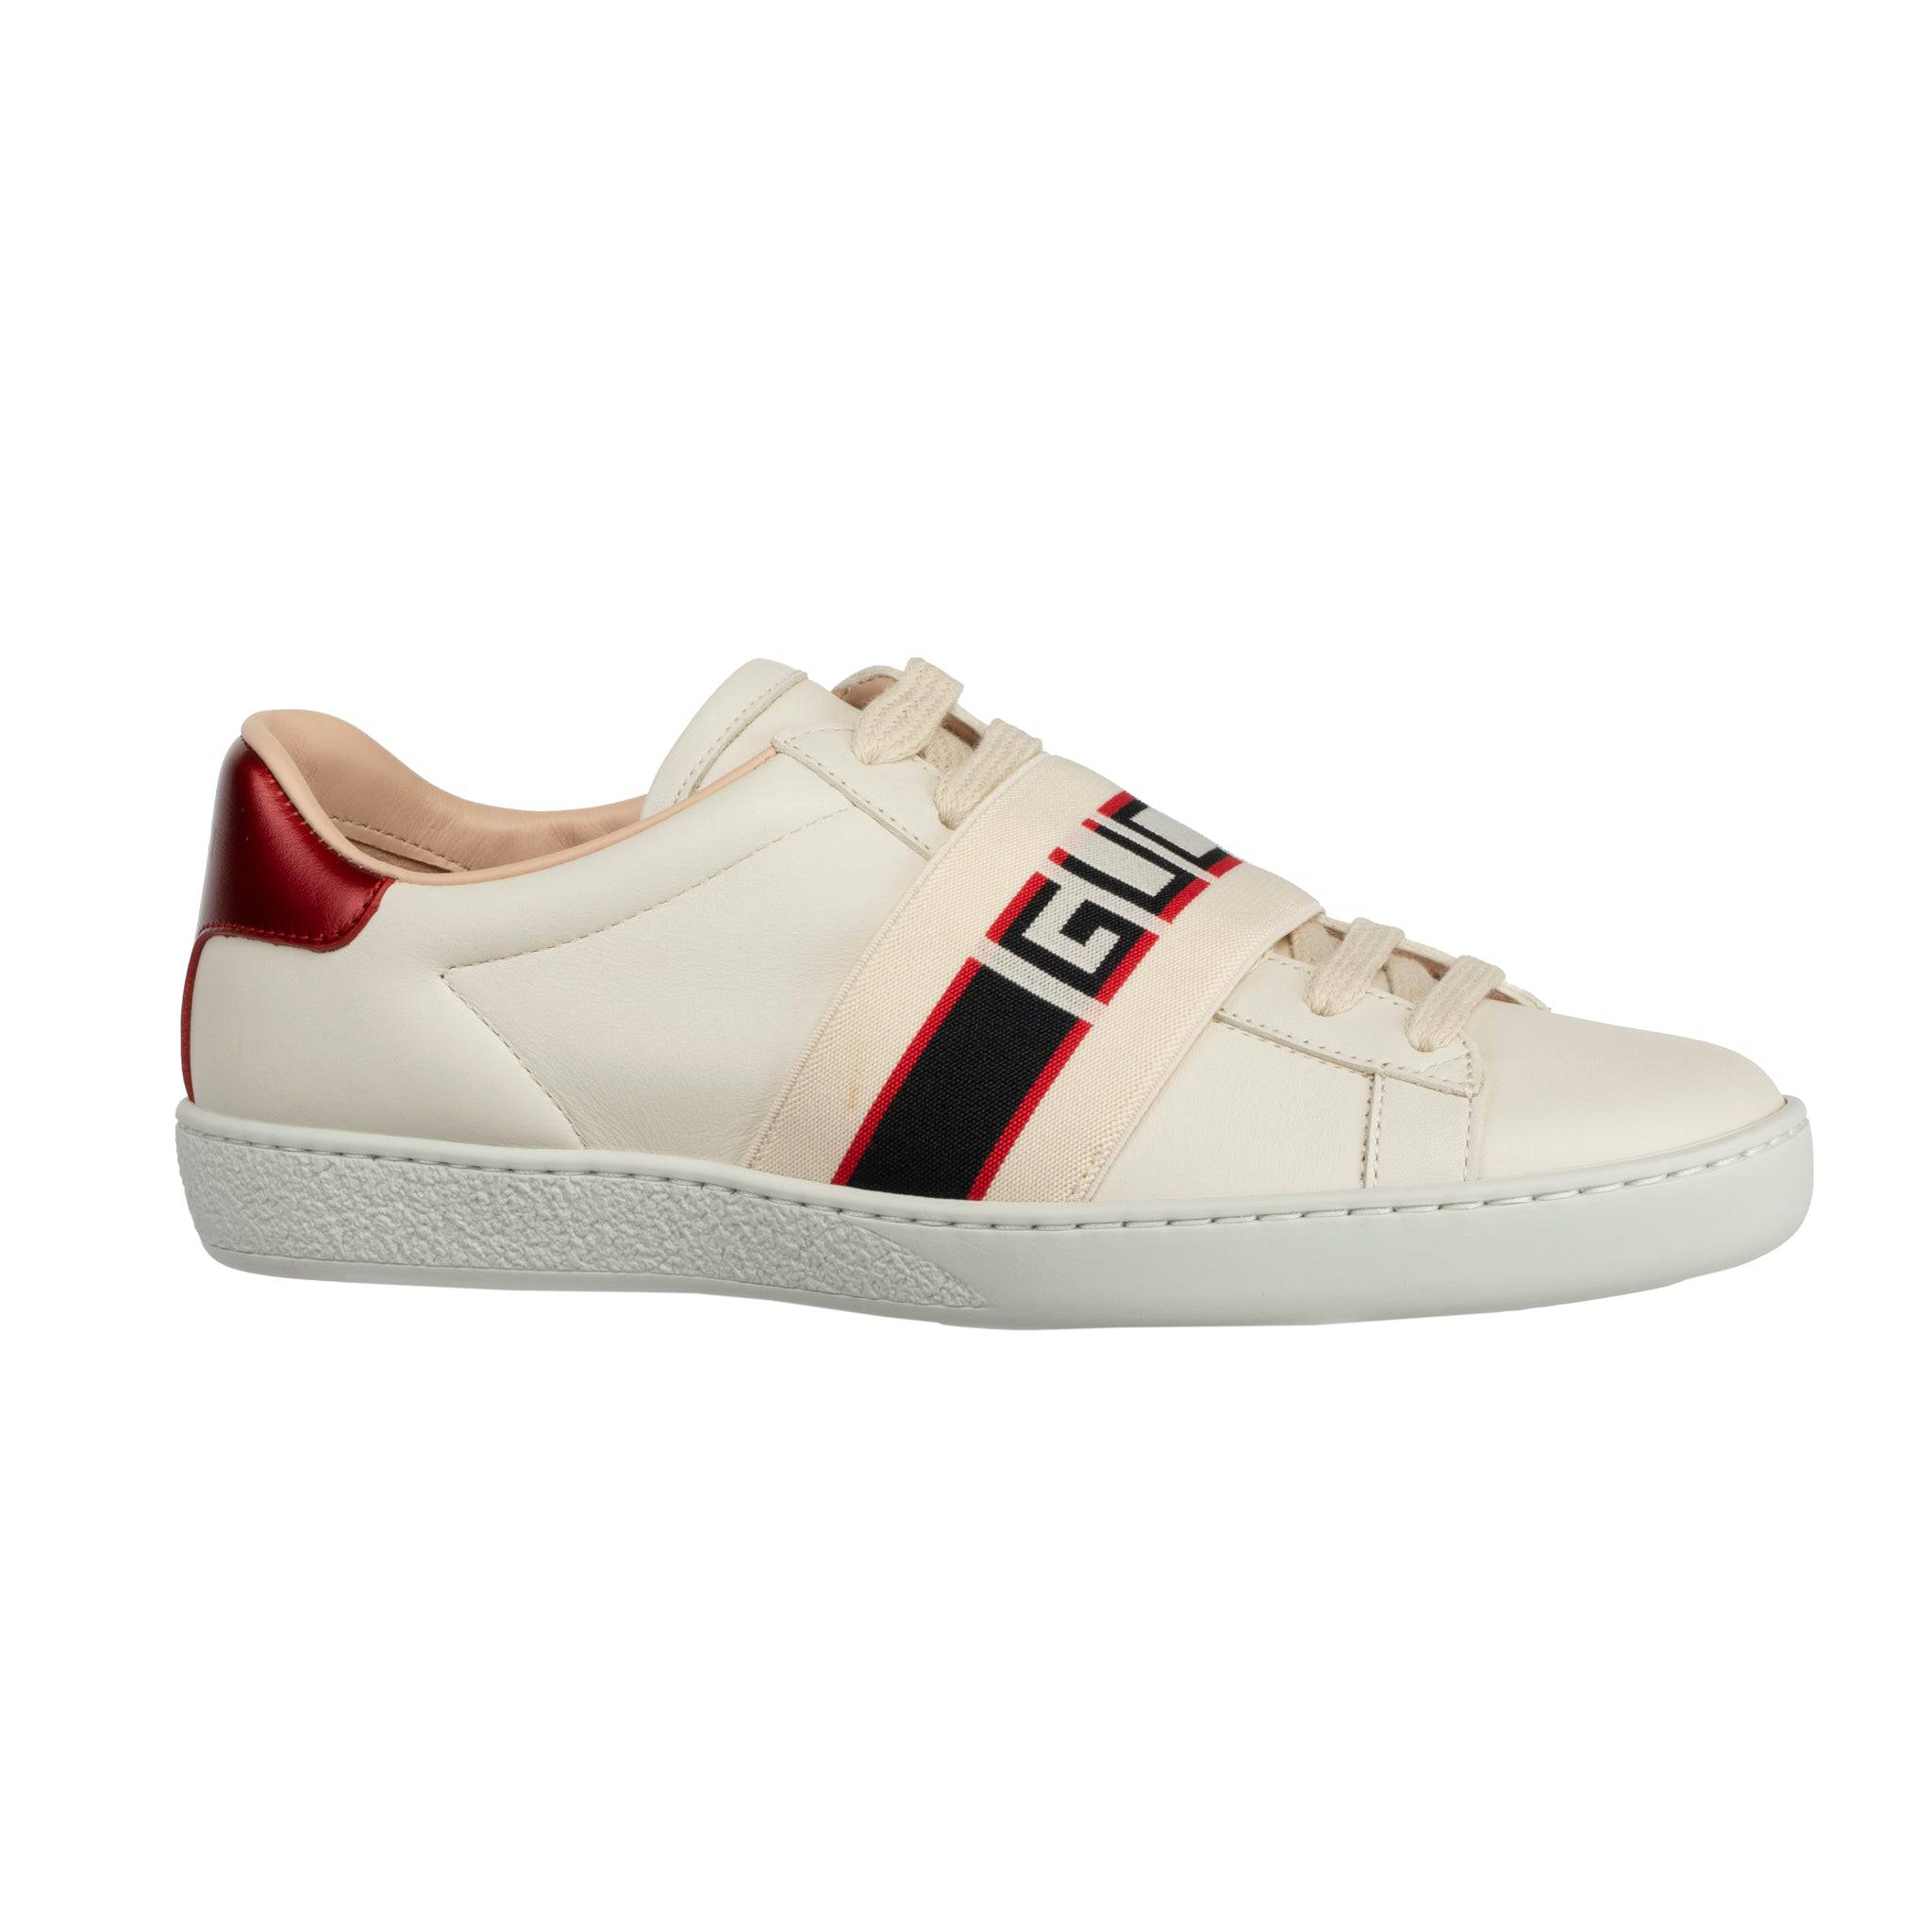 GUCCI ACE SNEAKER OFF-WHITE & METALLIC RED 35.5 IT - On Repeat